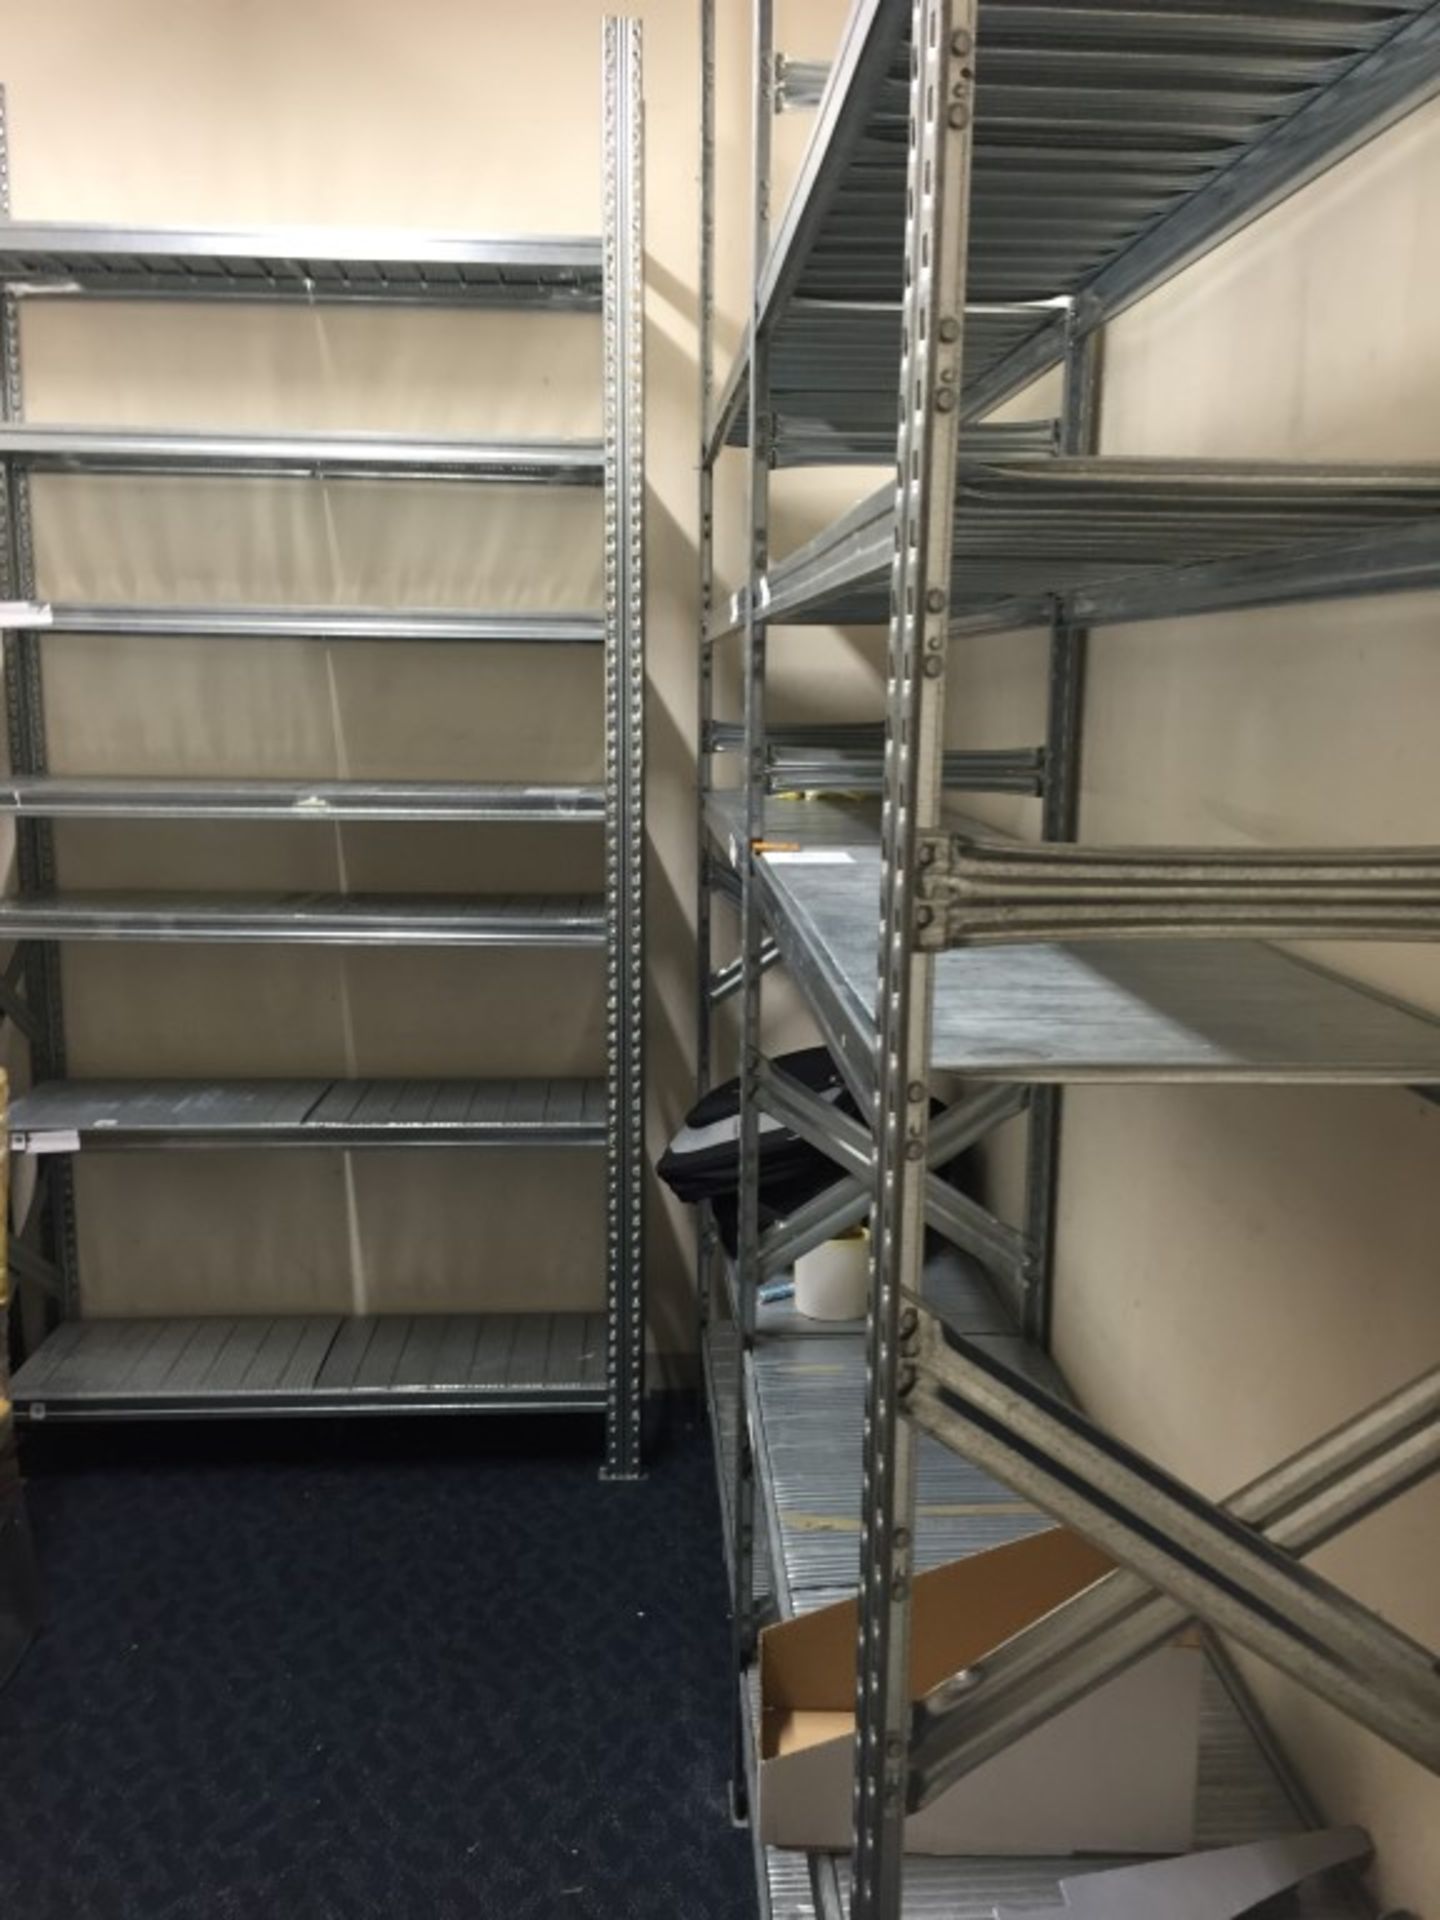 Job Lot of Italian made Metal Storage Racking with practical light weight shelving - Ideal for all - Image 3 of 6